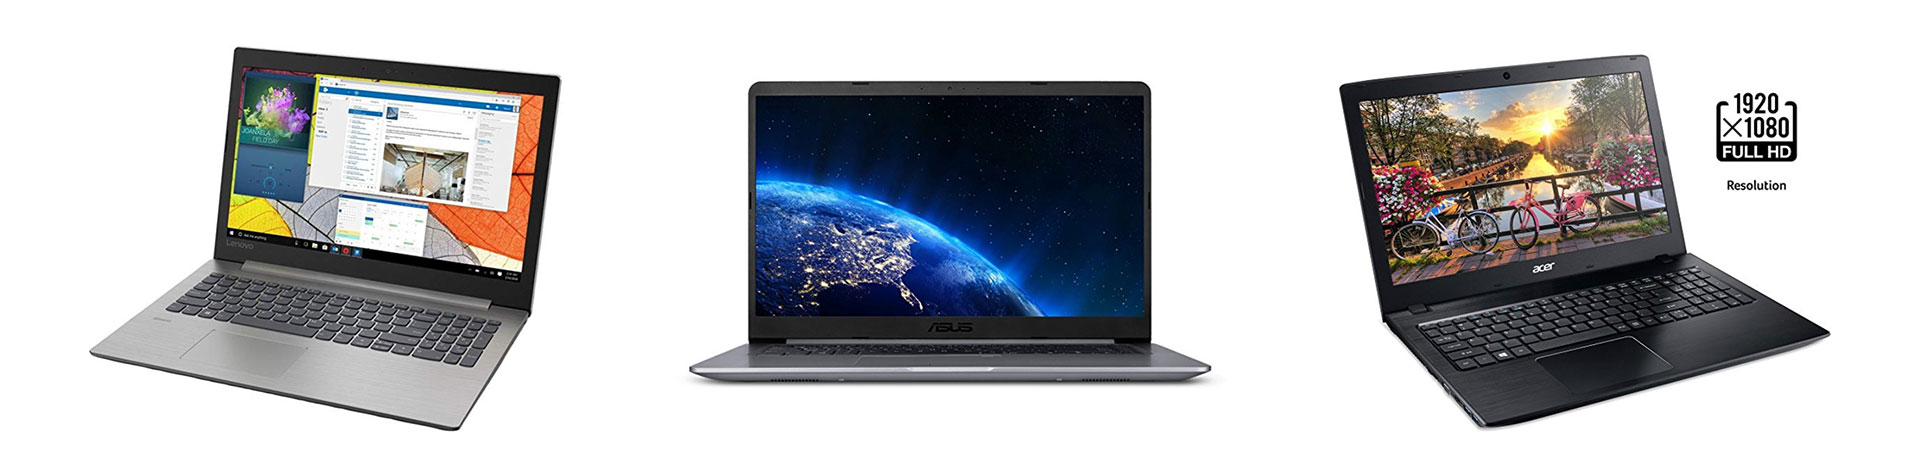 Just some of the good affordable laptops out there